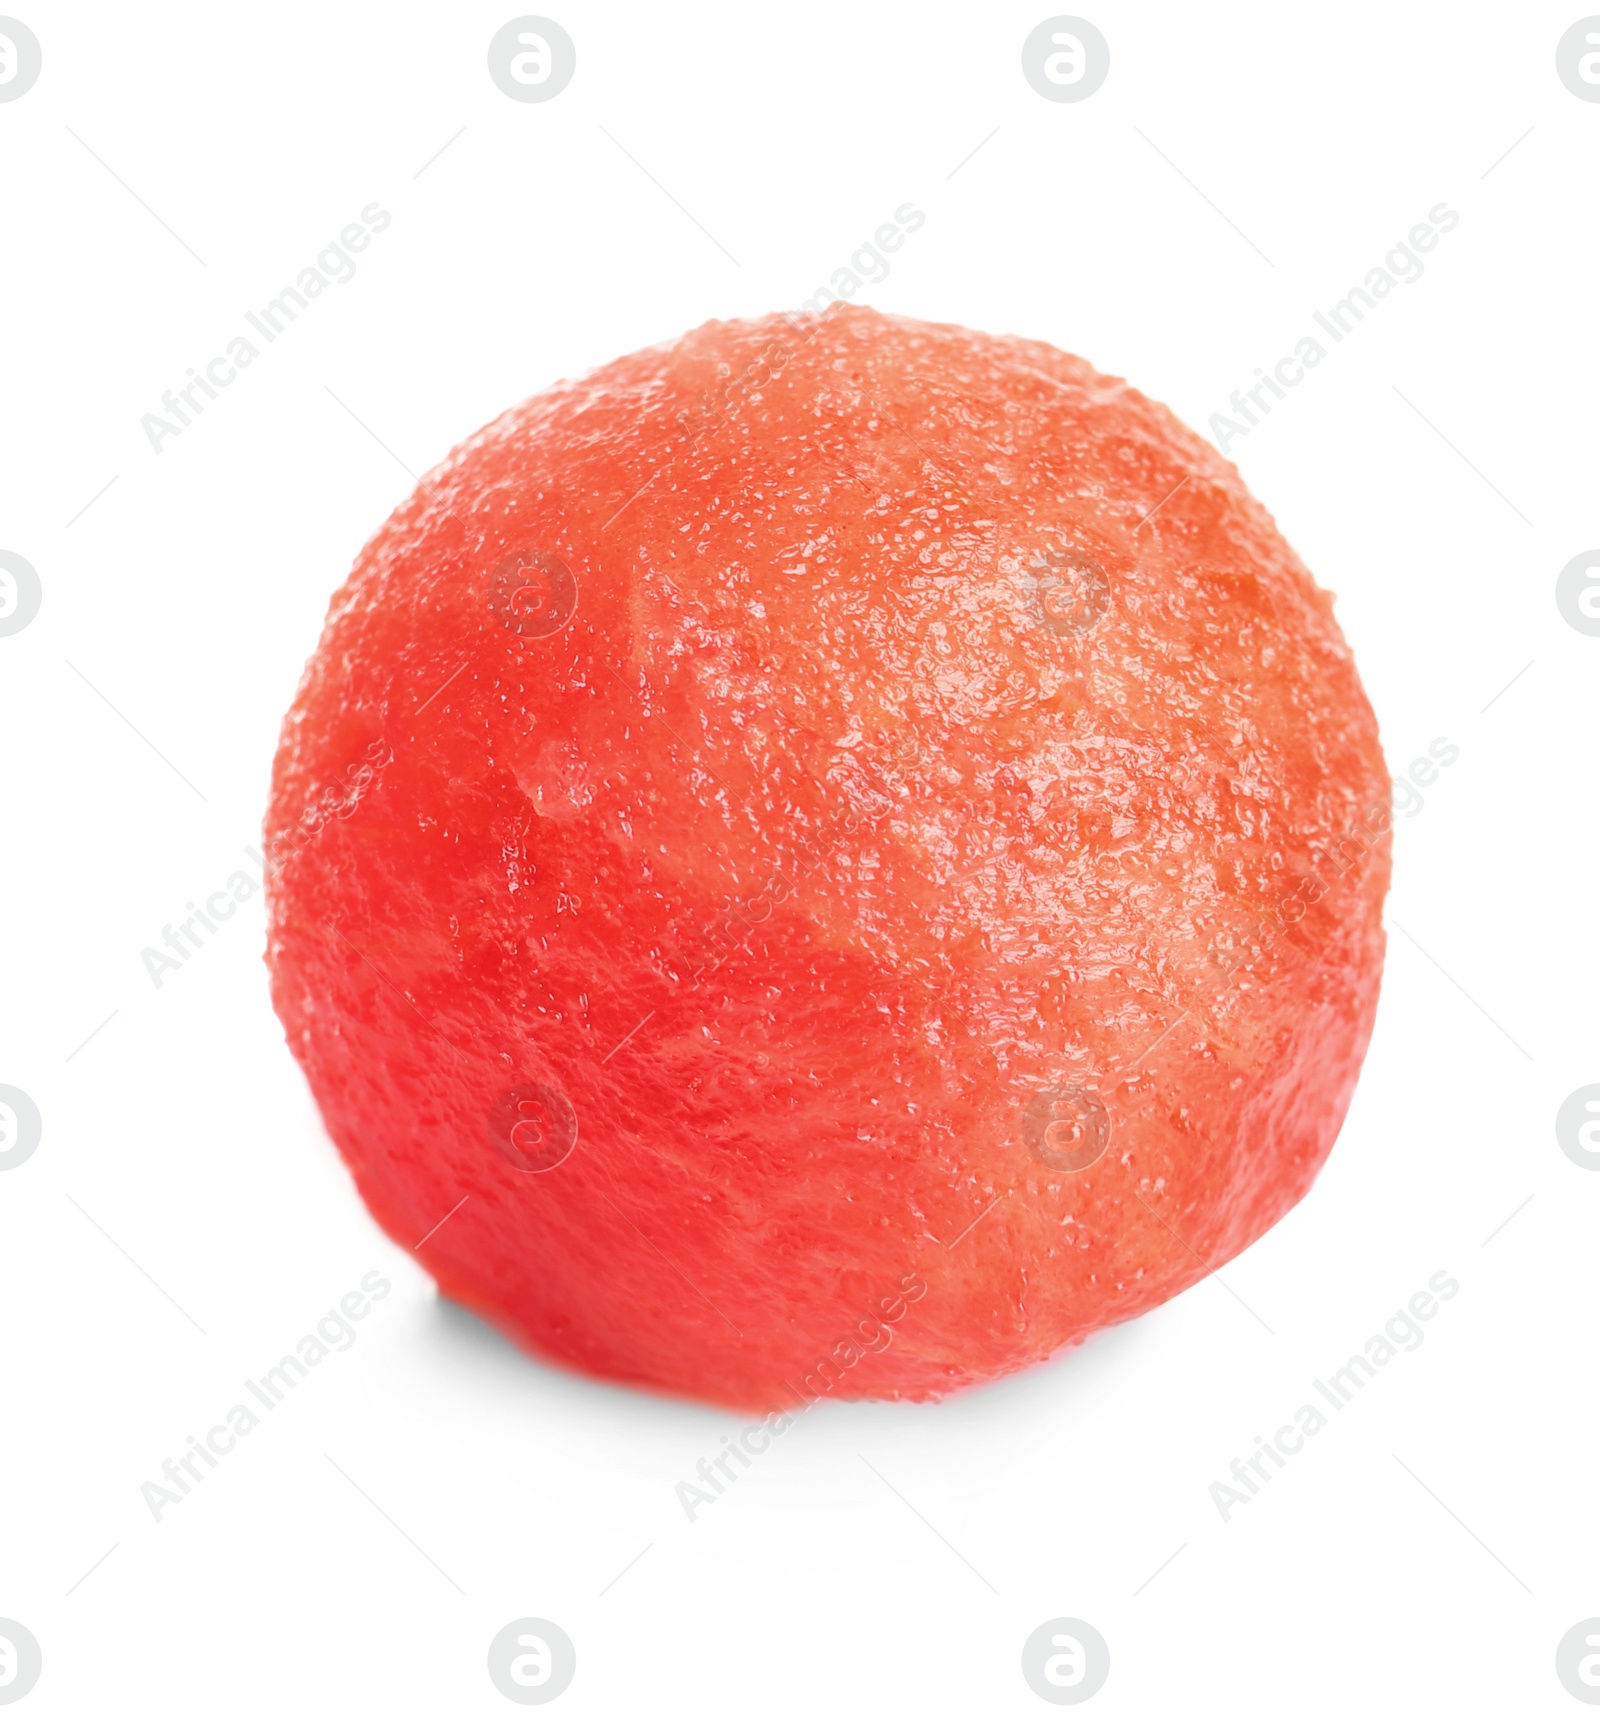 Photo of Juicy sweet watermelon ball on white background